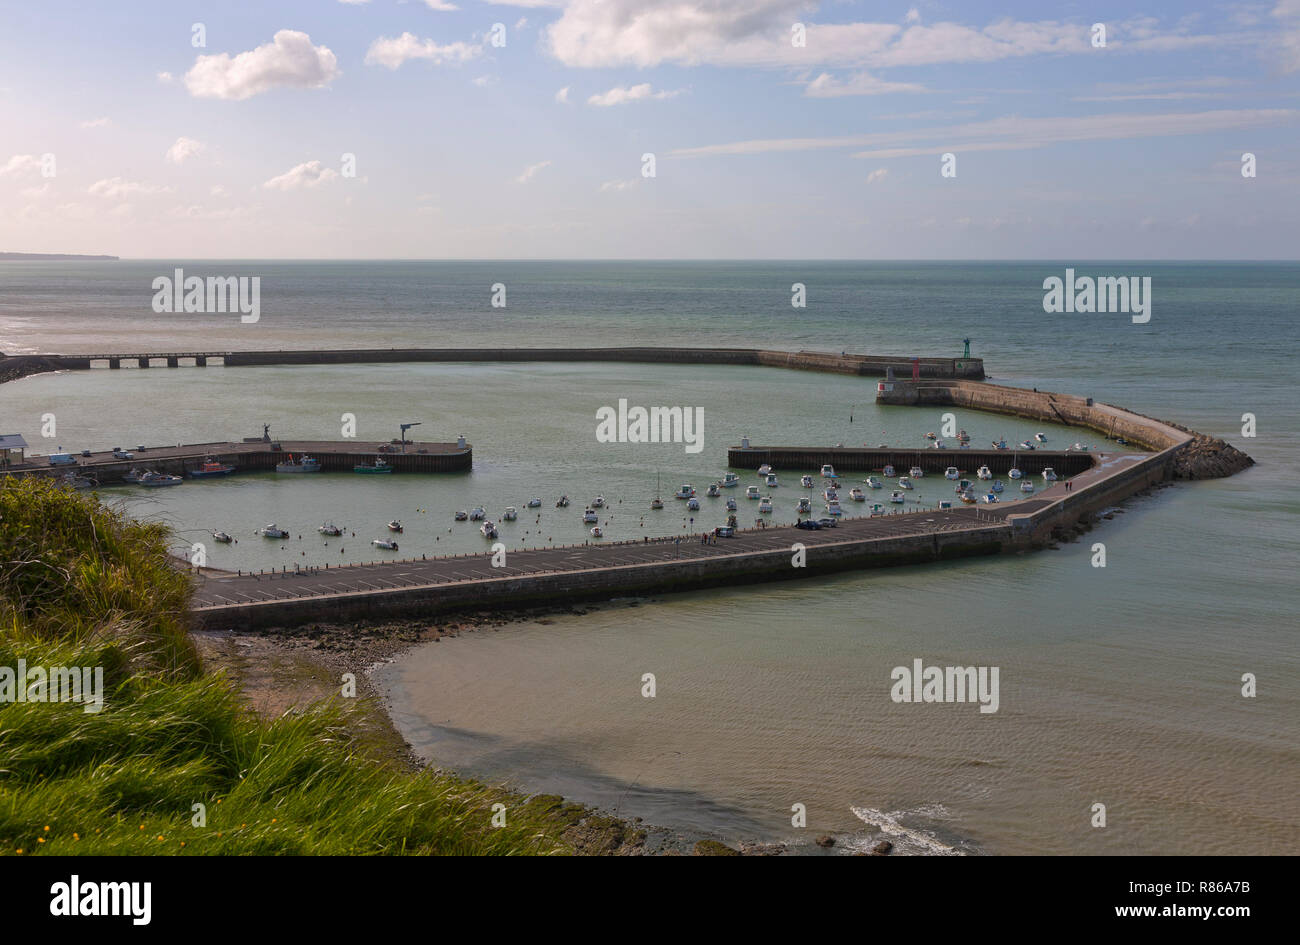 The harbour of Port-en-Bessin-Huppain in Normandy, France, on the English Channel, at sunset. Aerial view, between low and high tide. Stock Photo